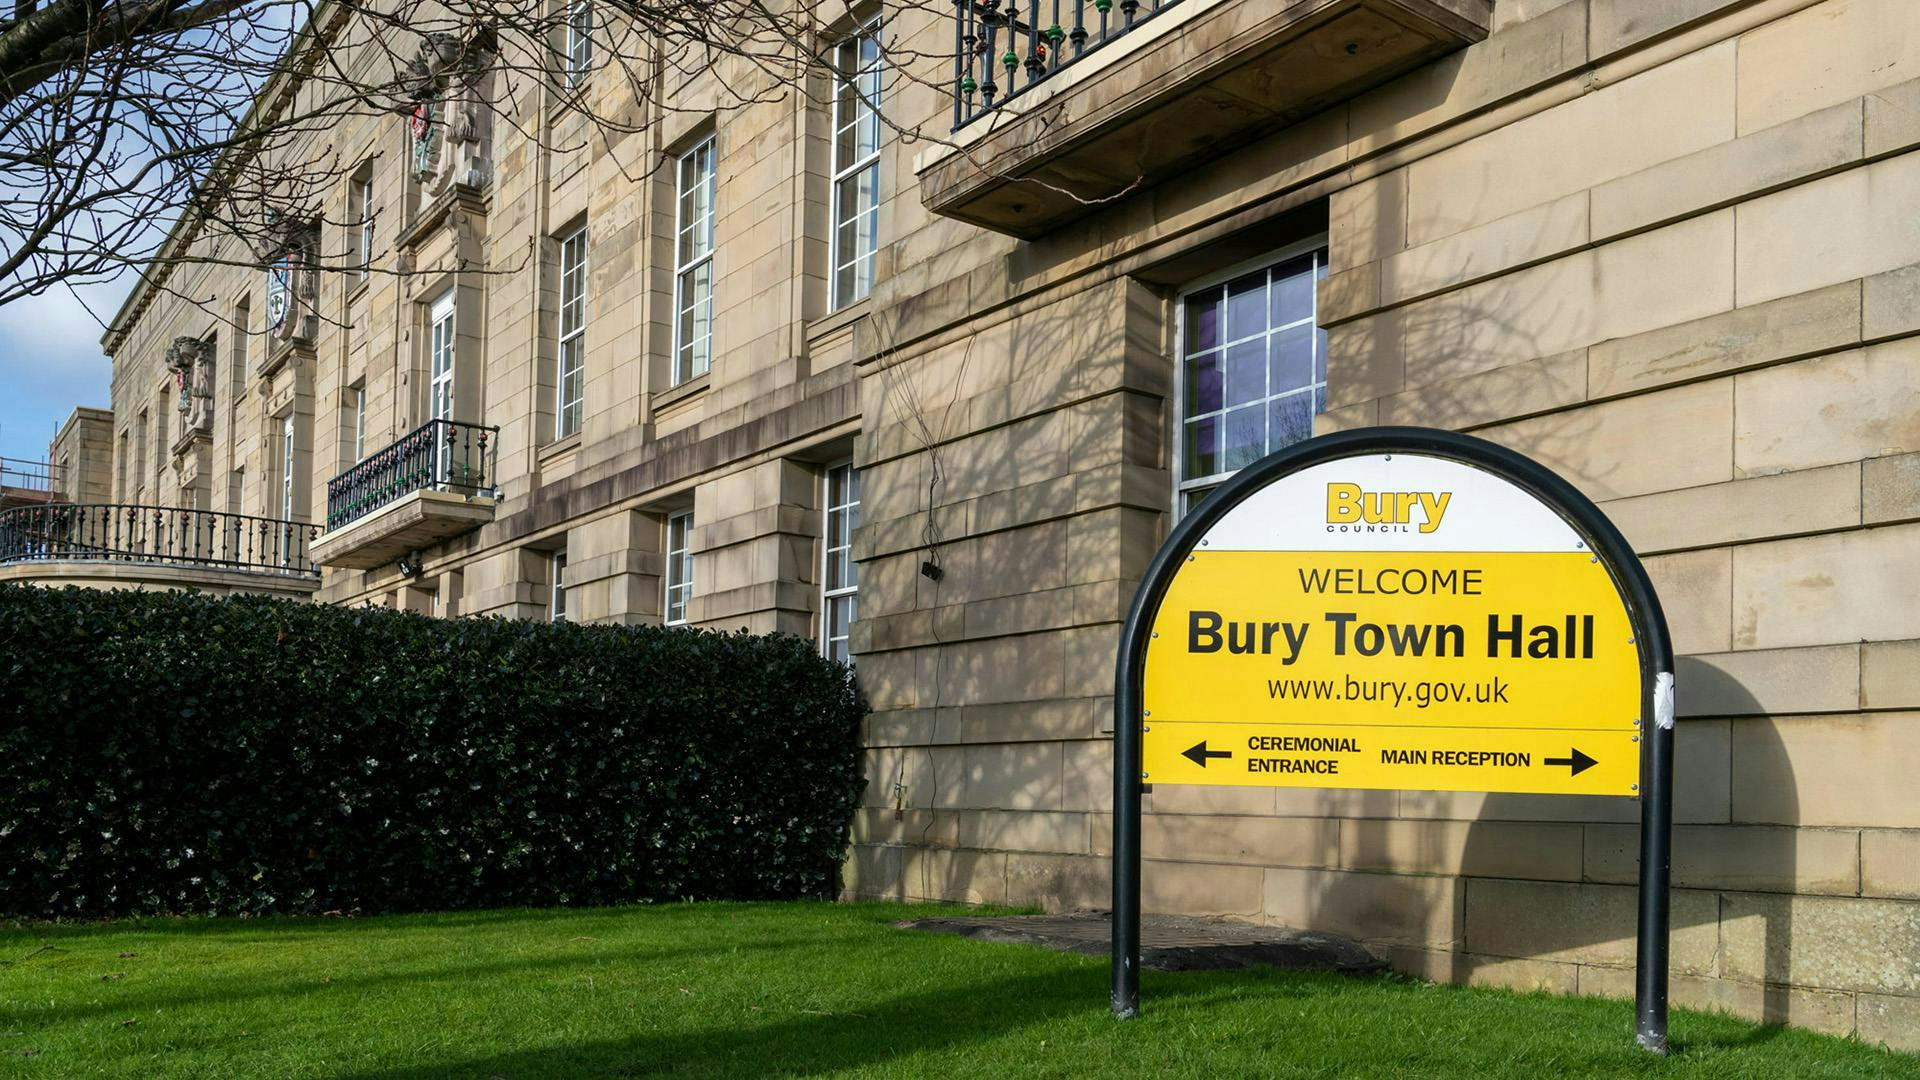 Bury town hall next to a small lawn with a hedge